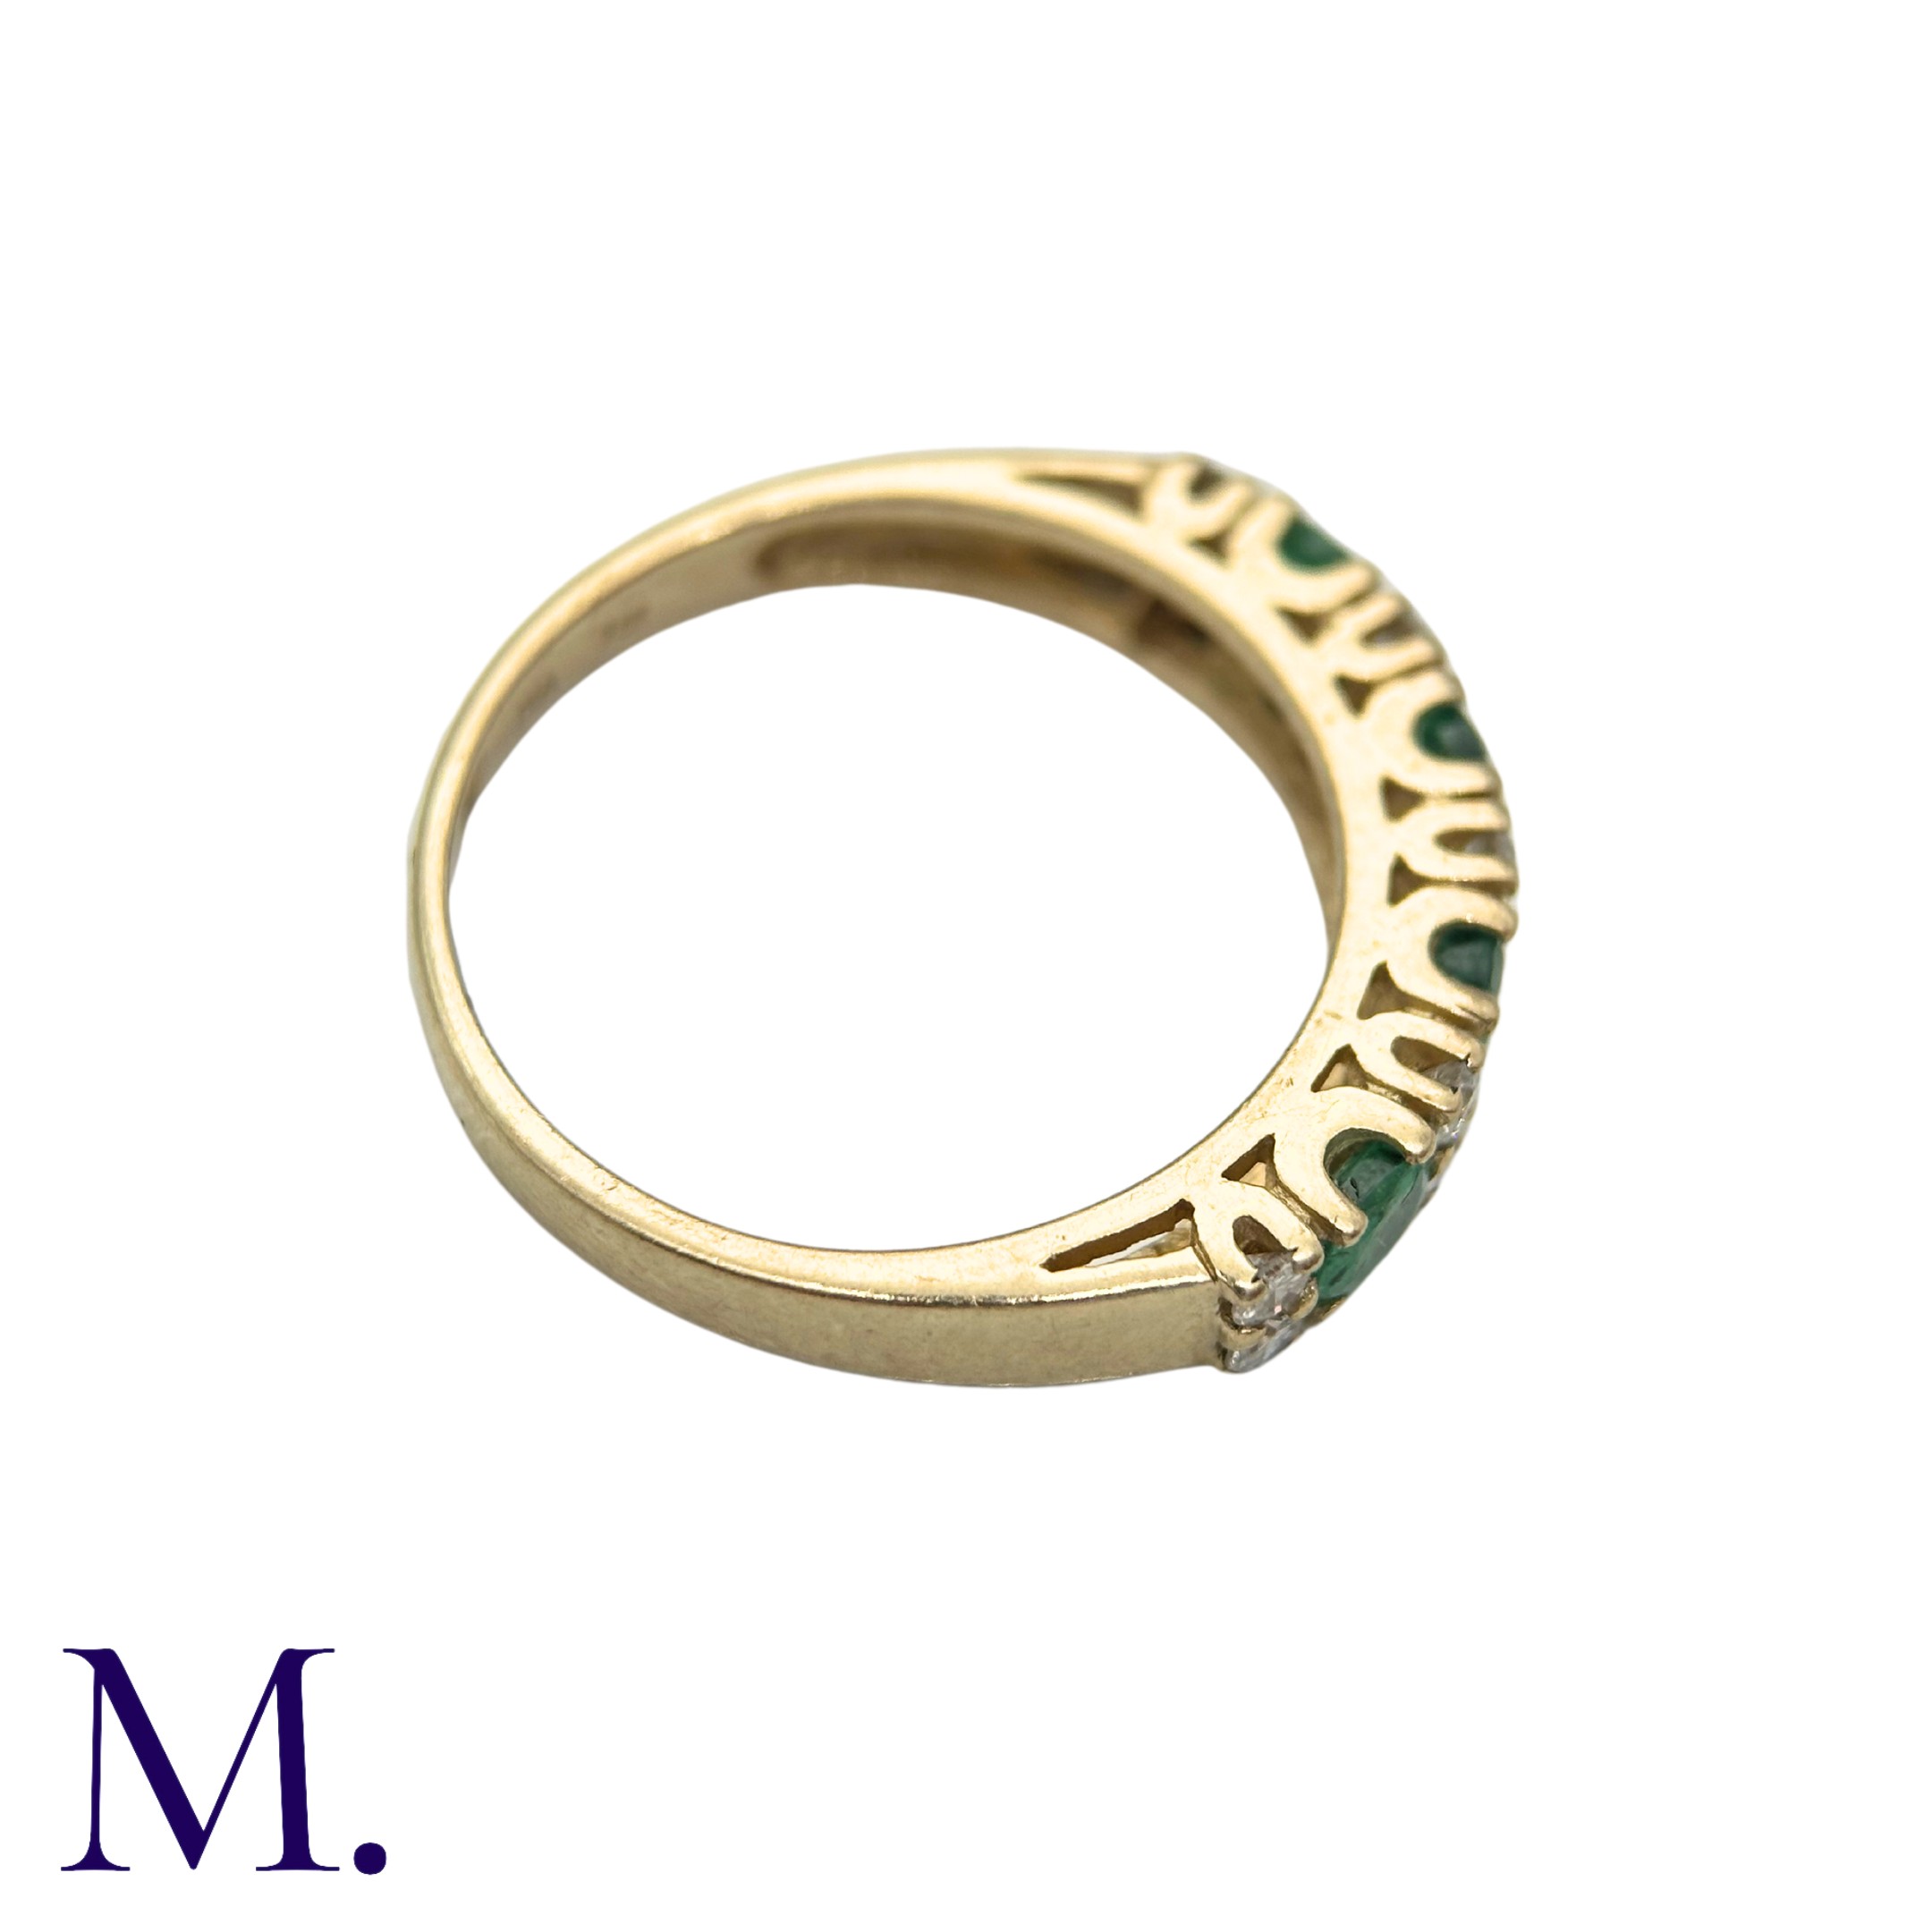 An Emerald And Diamond Ring in 9k yellow gold, set with four round cut emeralds punctuated with - Image 6 of 6